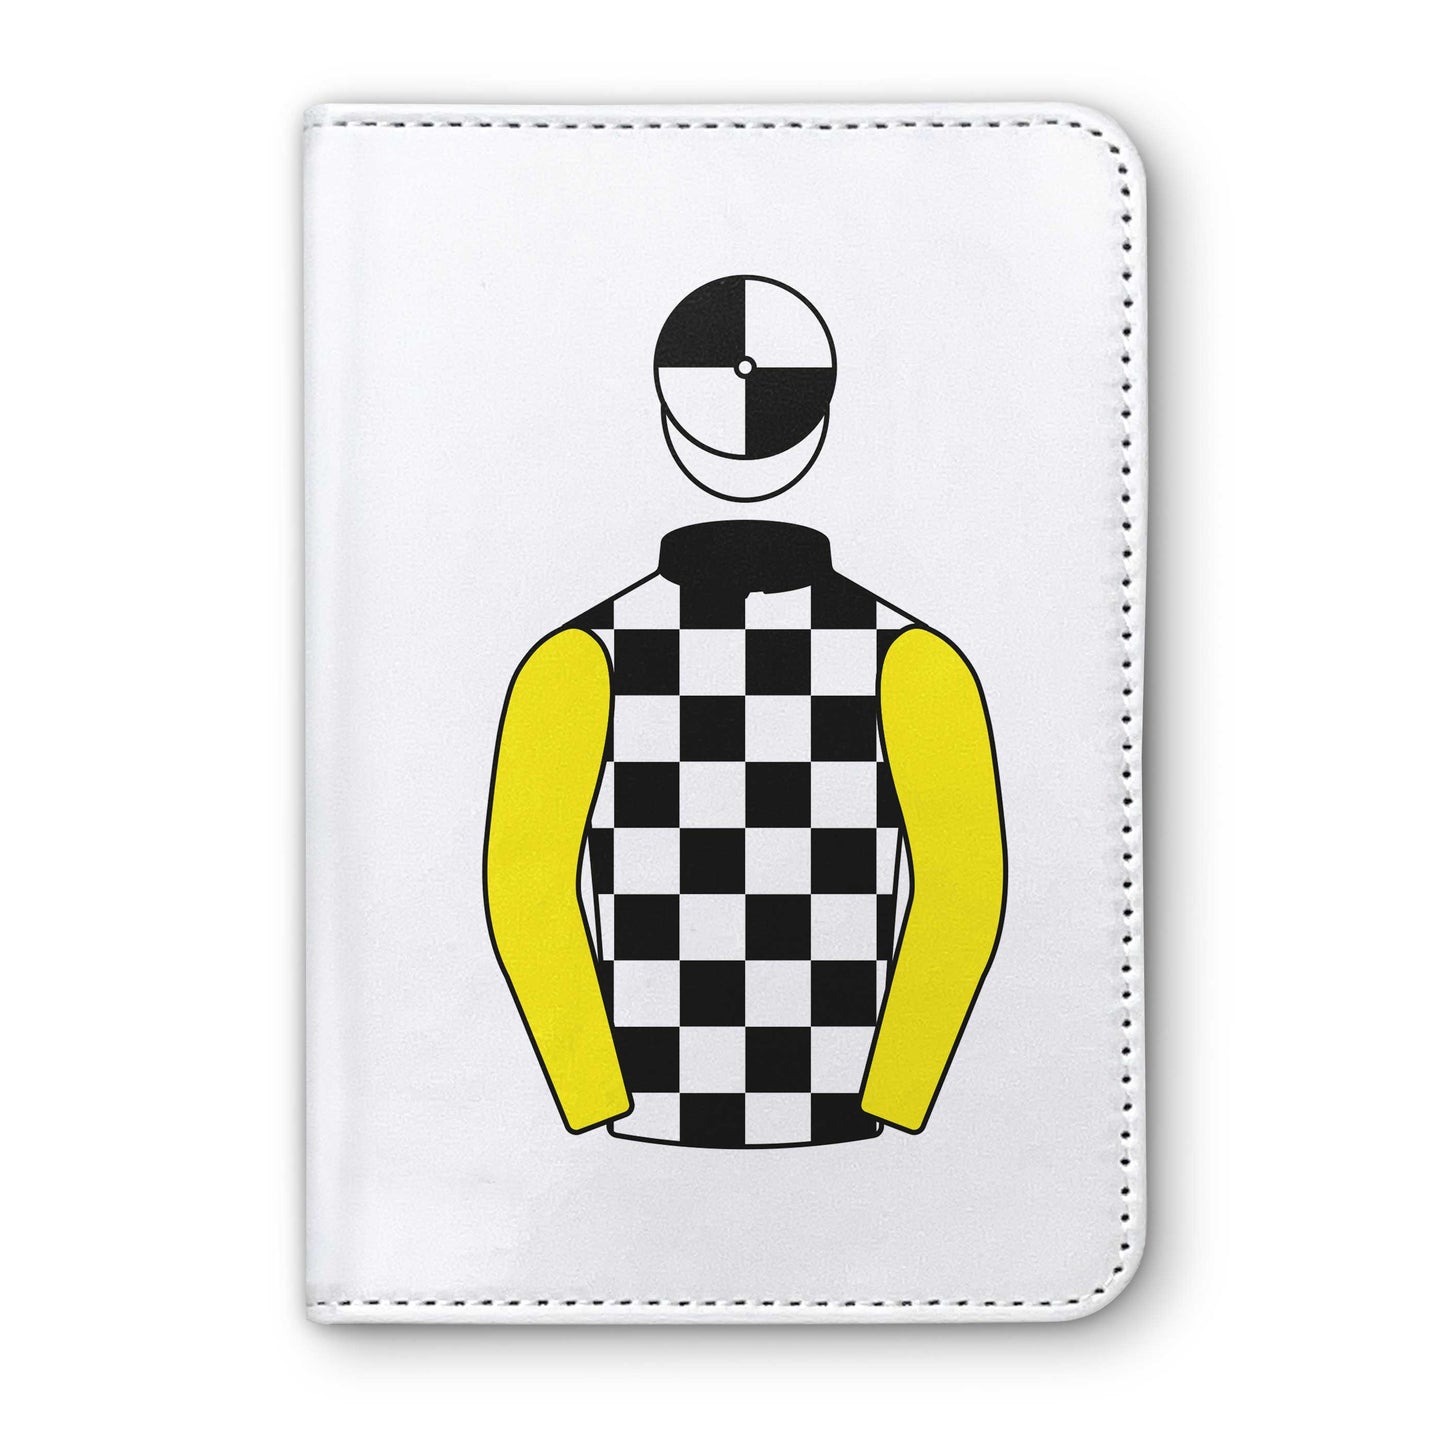 Malcolm C Denmark Horse Racing Passport Holder - Hacked Up Horse Racing Gifts